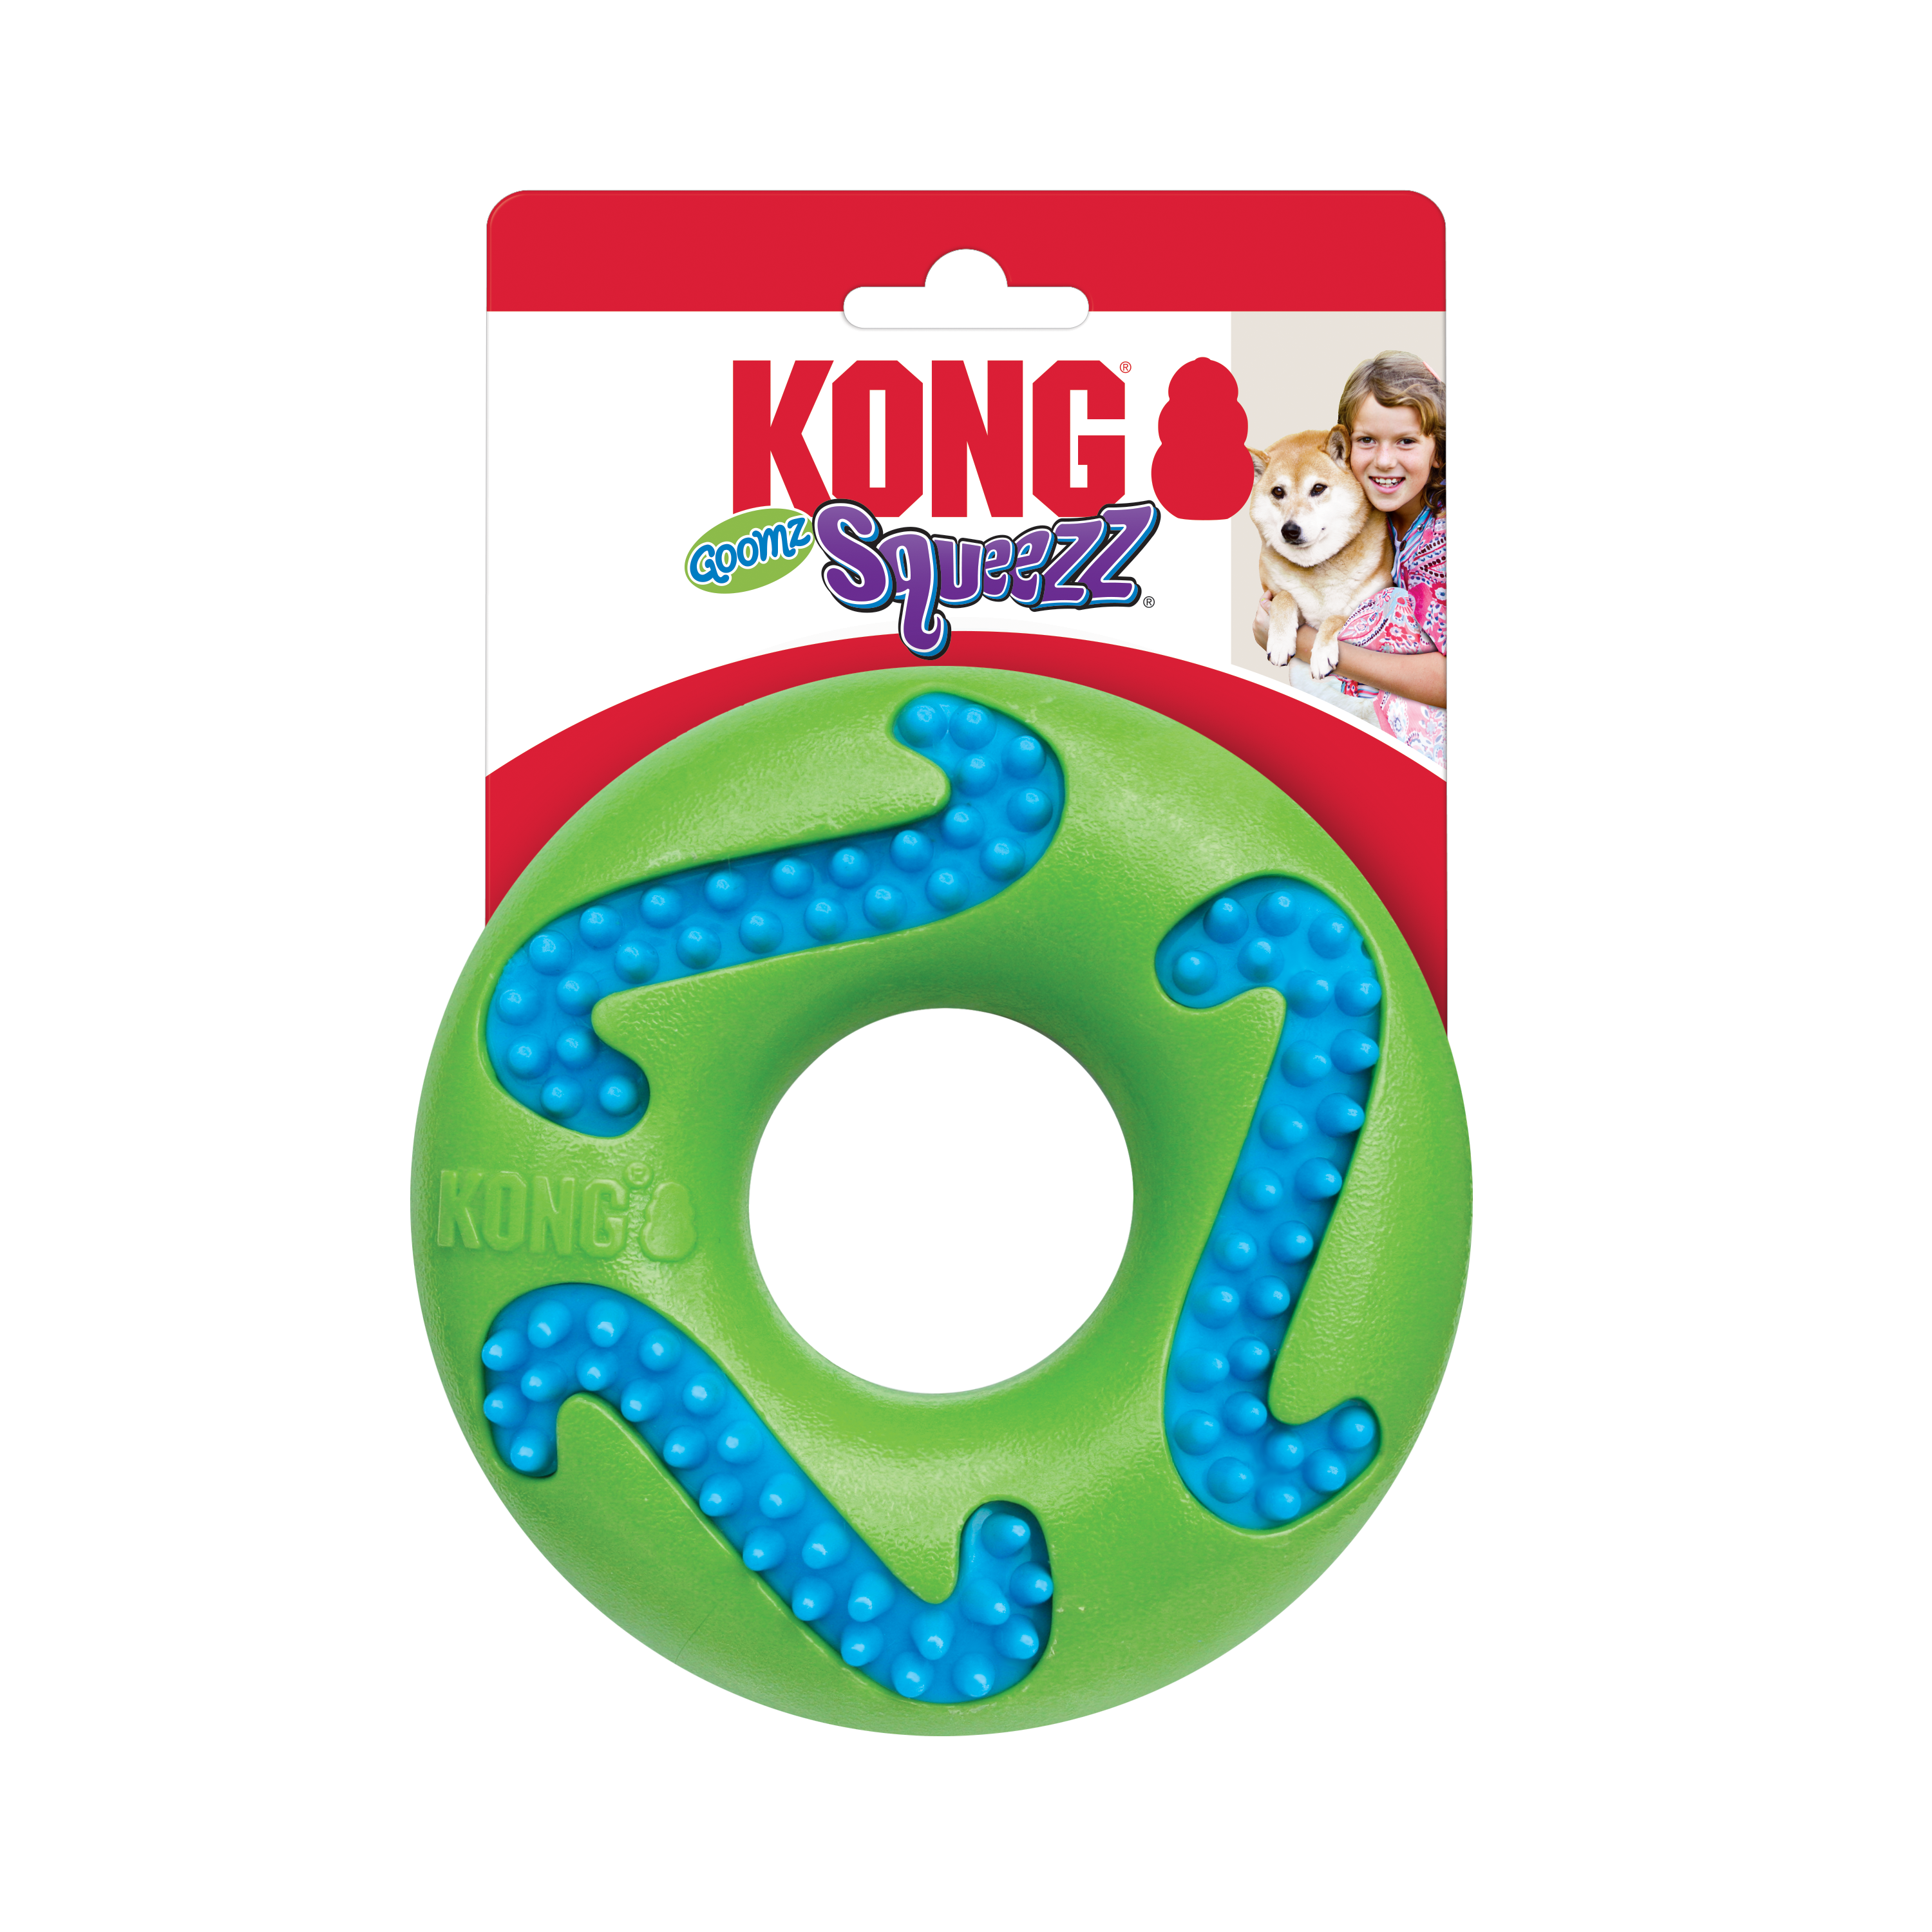 Squeezz Goomz Ring onpack product image